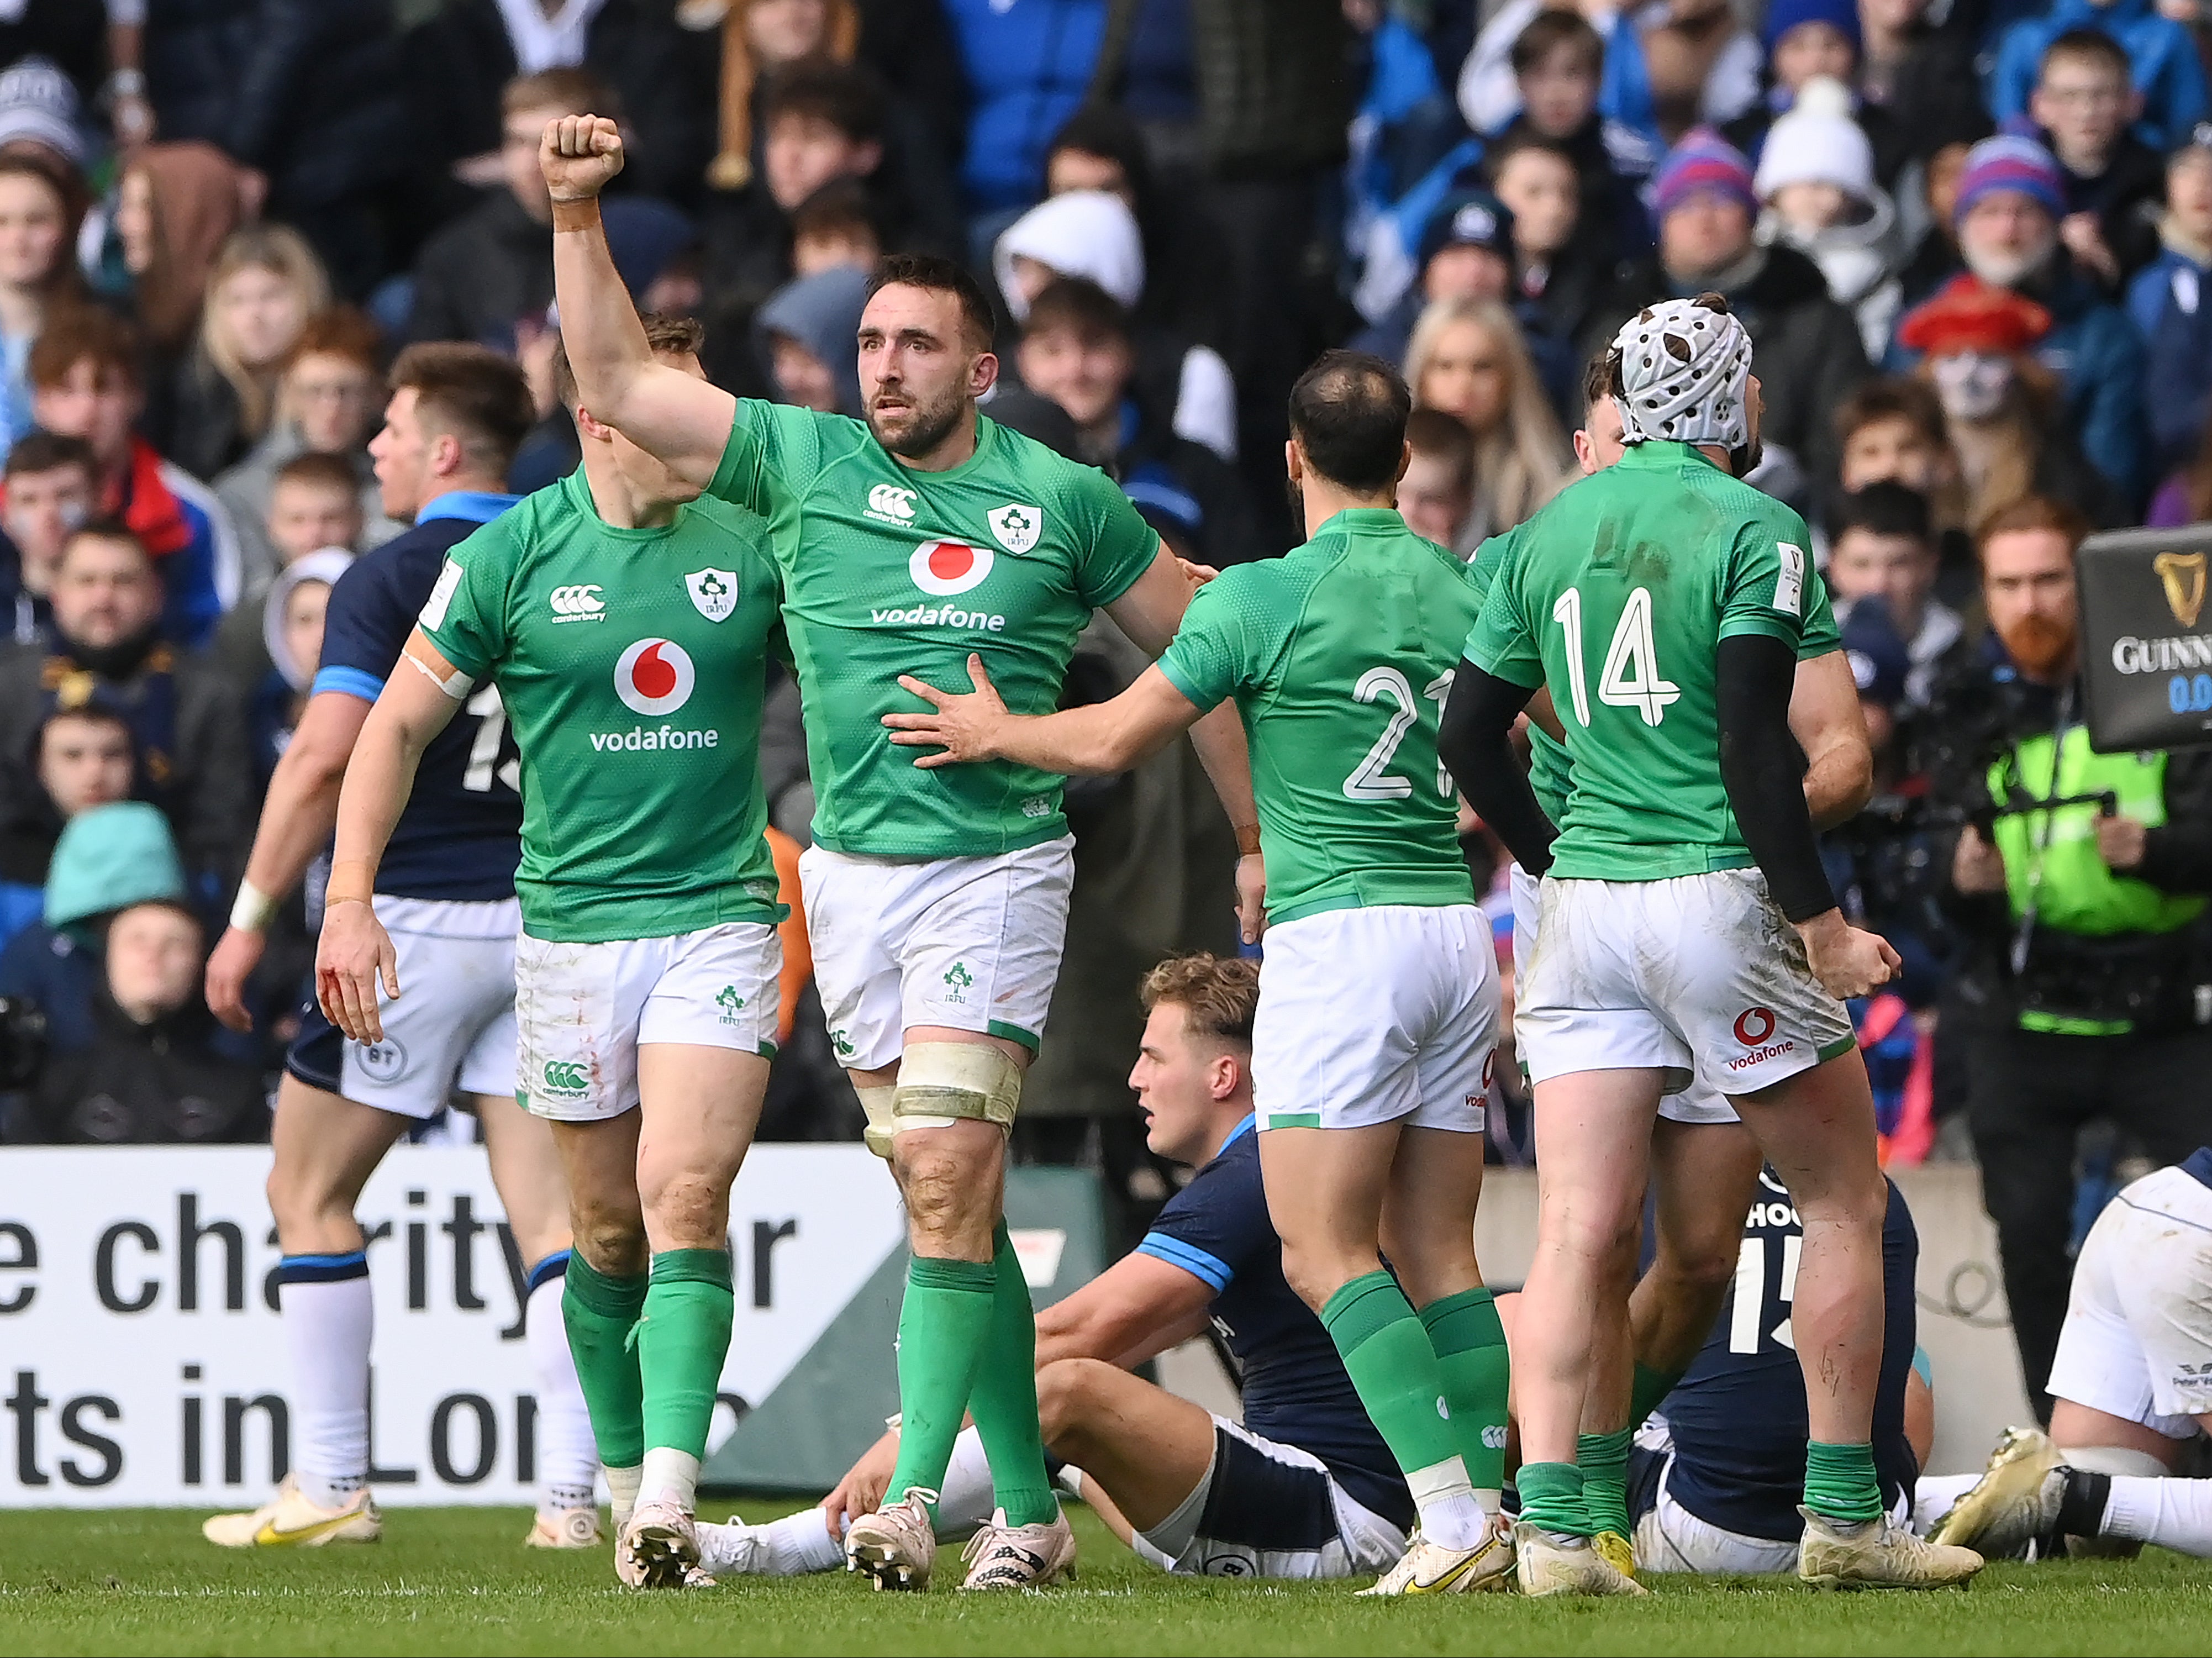 Scotland vs Ireland LIVE rugby Final score and result from Six Nations game today The Independent